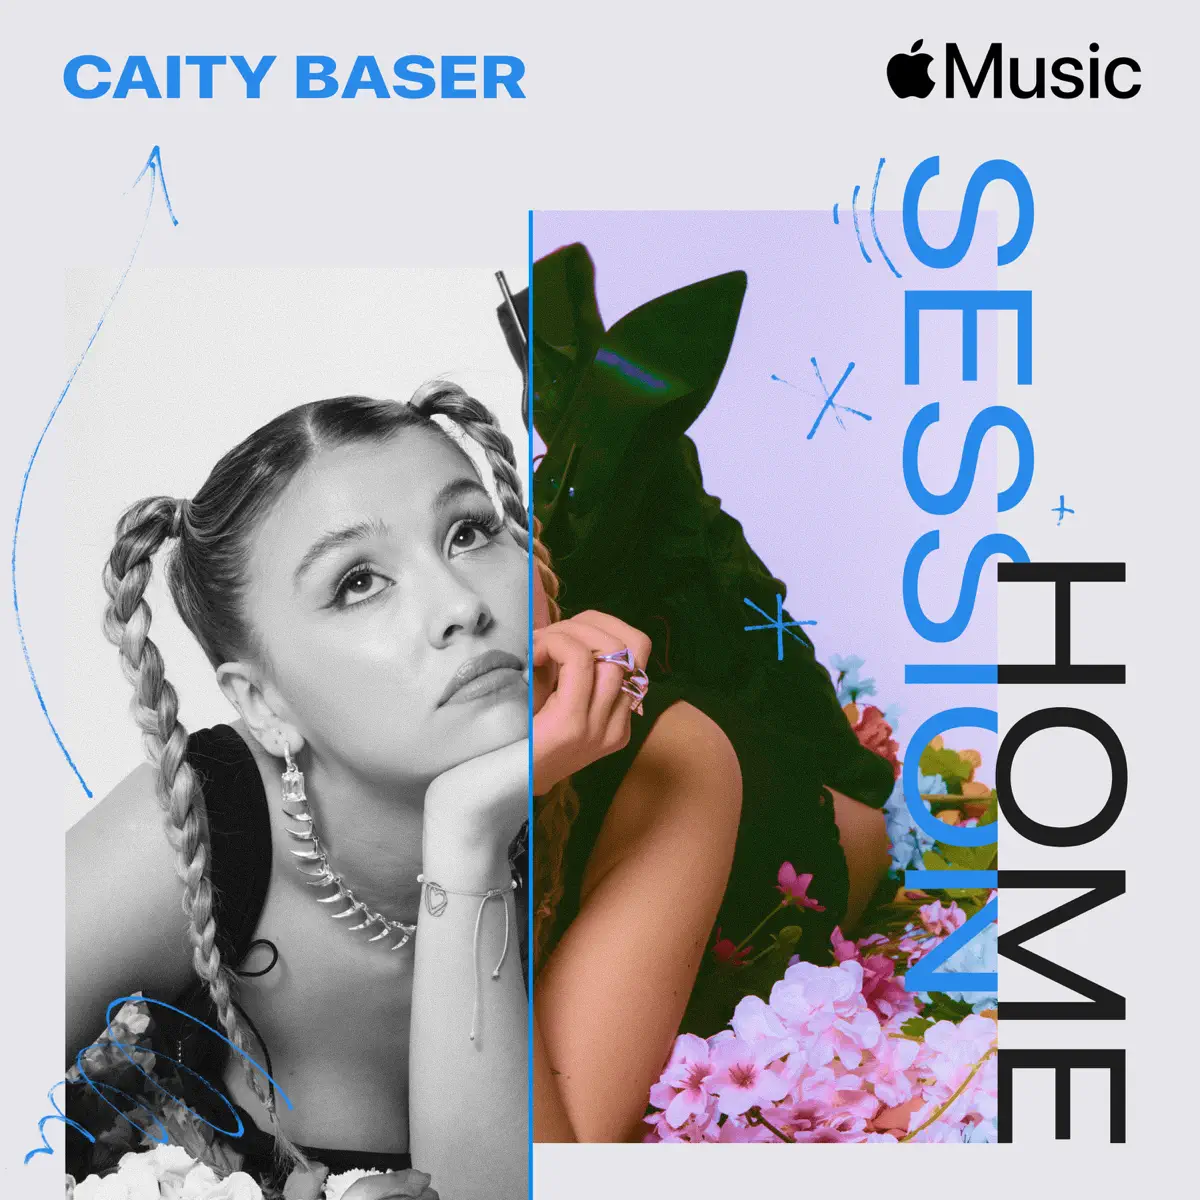 Caity Baser - Apple Music Home Session Caity Baser (2023) [iTunes Plus AAC M4A]-新房子